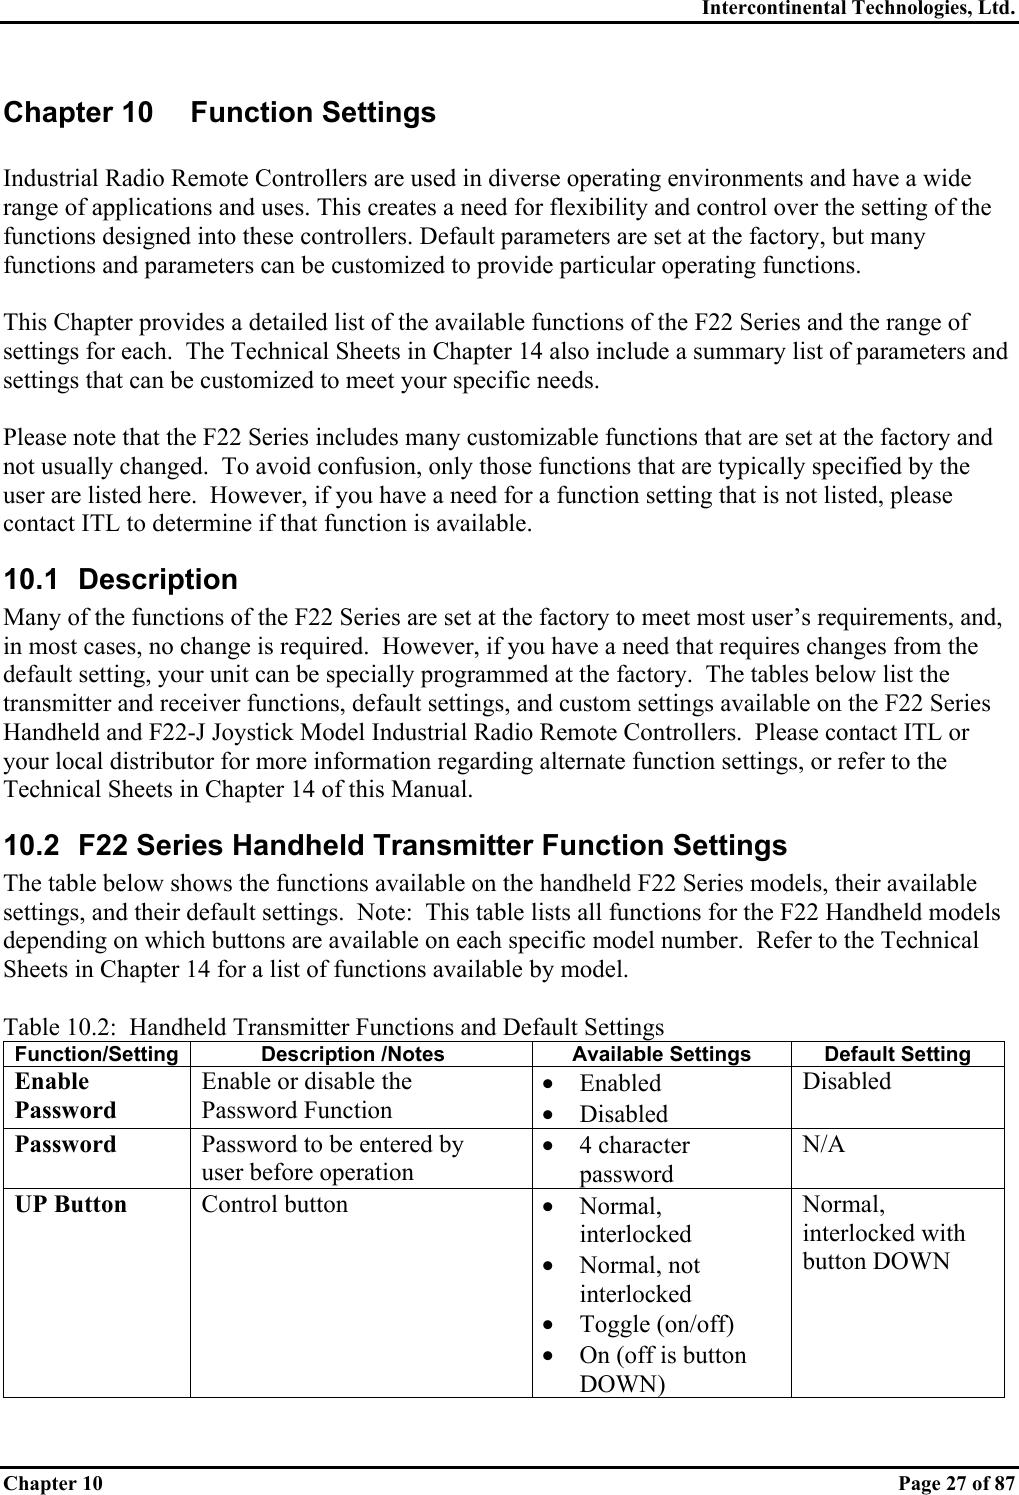 Intercontinental Technologies, Ltd. Chapter 10    Page 27 of 87 Chapter 10  Function Settings  Industrial Radio Remote Controllers are used in diverse operating environments and have a wide range of applications and uses. This creates a need for flexibility and control over the setting of the functions designed into these controllers. Default parameters are set at the factory, but many functions and parameters can be customized to provide particular operating functions.  This Chapter provides a detailed list of the available functions of the F22 Series and the range of settings for each.  The Technical Sheets in Chapter 14 also include a summary list of parameters and settings that can be customized to meet your specific needs.  Please note that the F22 Series includes many customizable functions that are set at the factory and not usually changed.  To avoid confusion, only those functions that are typically specified by the user are listed here.  However, if you have a need for a function setting that is not listed, please contact ITL to determine if that function is available. 10.1 Description Many of the functions of the F22 Series are set at the factory to meet most user’s requirements, and, in most cases, no change is required.  However, if you have a need that requires changes from the default setting, your unit can be specially programmed at the factory.  The tables below list the transmitter and receiver functions, default settings, and custom settings available on the F22 Series Handheld and F22-J Joystick Model Industrial Radio Remote Controllers.  Please contact ITL or your local distributor for more information regarding alternate function settings, or refer to the Technical Sheets in Chapter 14 of this Manual. 10.2  F22 Series Handheld Transmitter Function Settings The table below shows the functions available on the handheld F22 Series models, their available settings, and their default settings.  Note:  This table lists all functions for the F22 Handheld models depending on which buttons are available on each specific model number.  Refer to the Technical Sheets in Chapter 14 for a list of functions available by model.  Table 10.2:  Handheld Transmitter Functions and Default Settings Function/Setting  Description /Notes  Available Settings  Default Setting Enable Password Enable or disable the Password Function •  Enabled •  Disabled Disabled Password  Password to be entered by user before operation •  4 character password N/A UP Button  Control button  •  Normal, interlocked •  Normal, not interlocked •  Toggle (on/off) •  On (off is button DOWN) Normal, interlocked with button DOWN 